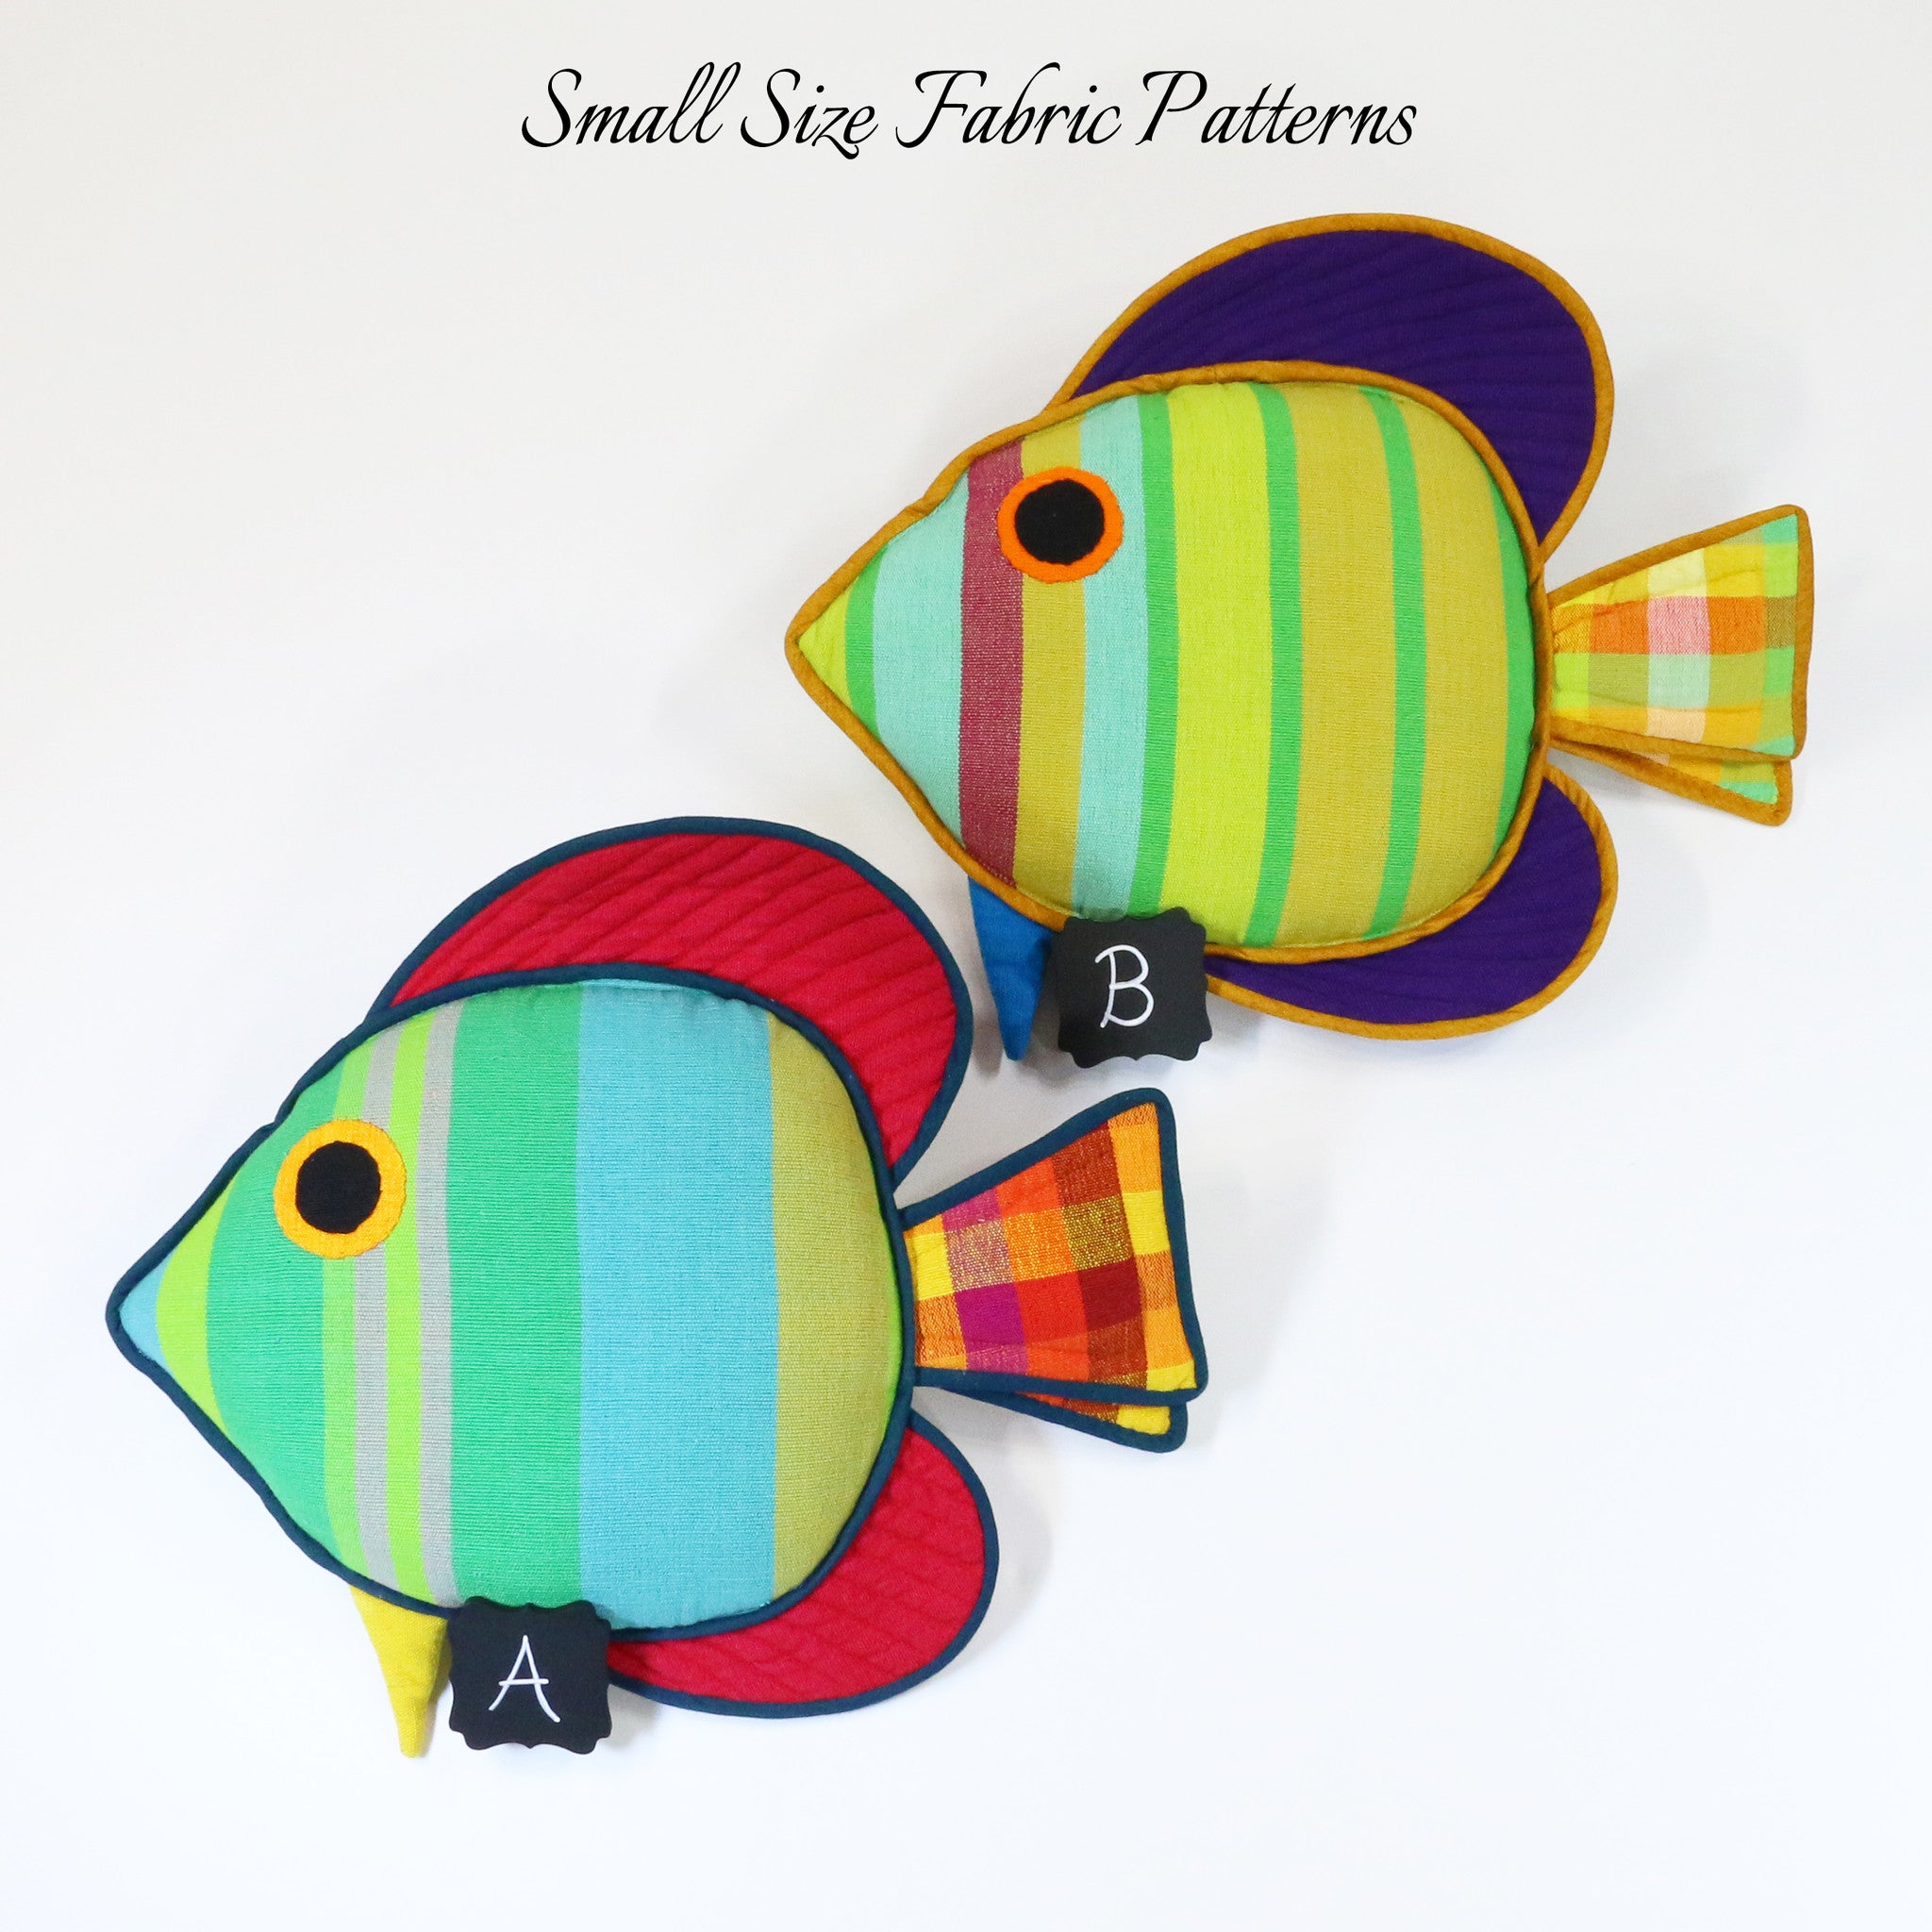 Bailey, the Sail Fin Fish – all small size fabric patterns shown